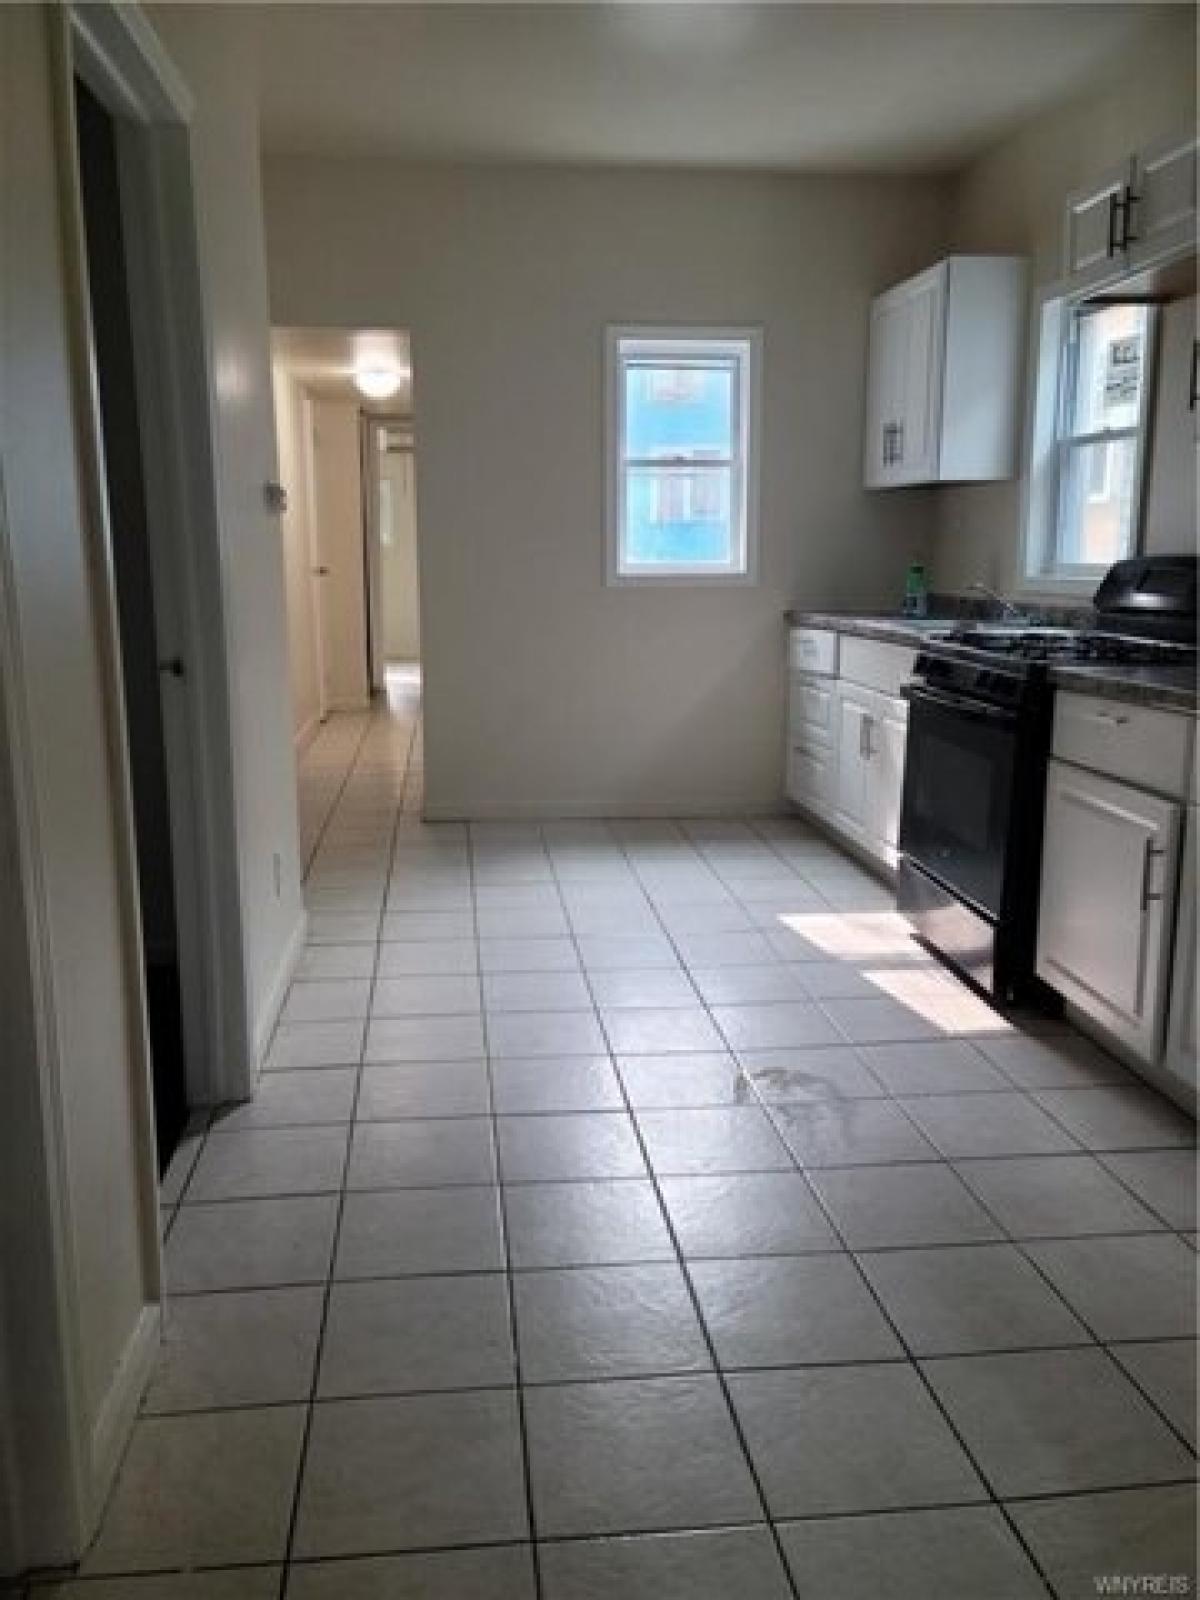 Picture of Home For Rent in Buffalo, New York, United States